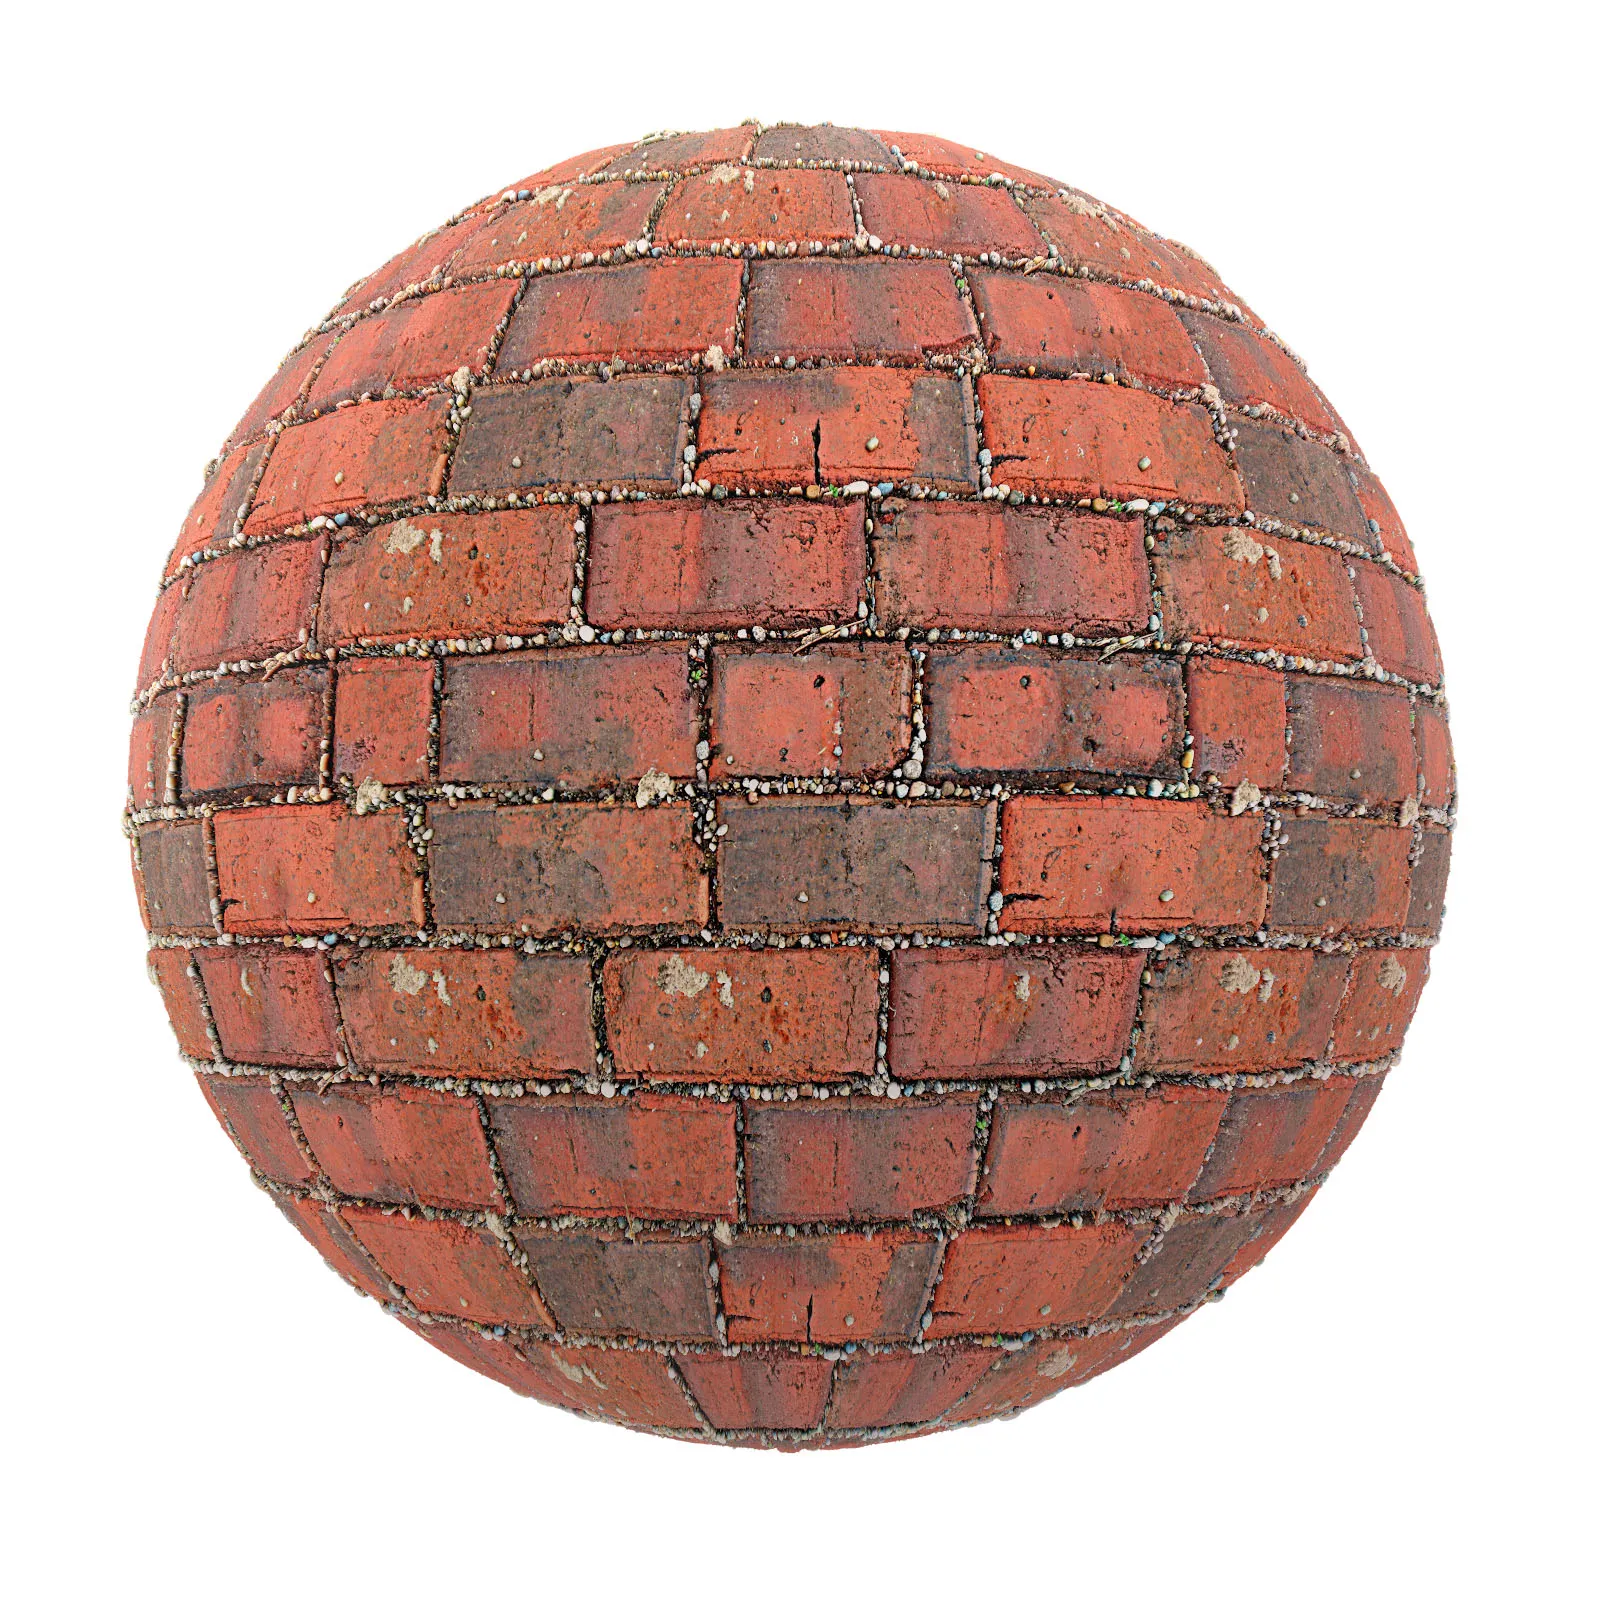 PBR CGAXIS TEXTURES – PAVEMENTS – Red Brick Pavement 4